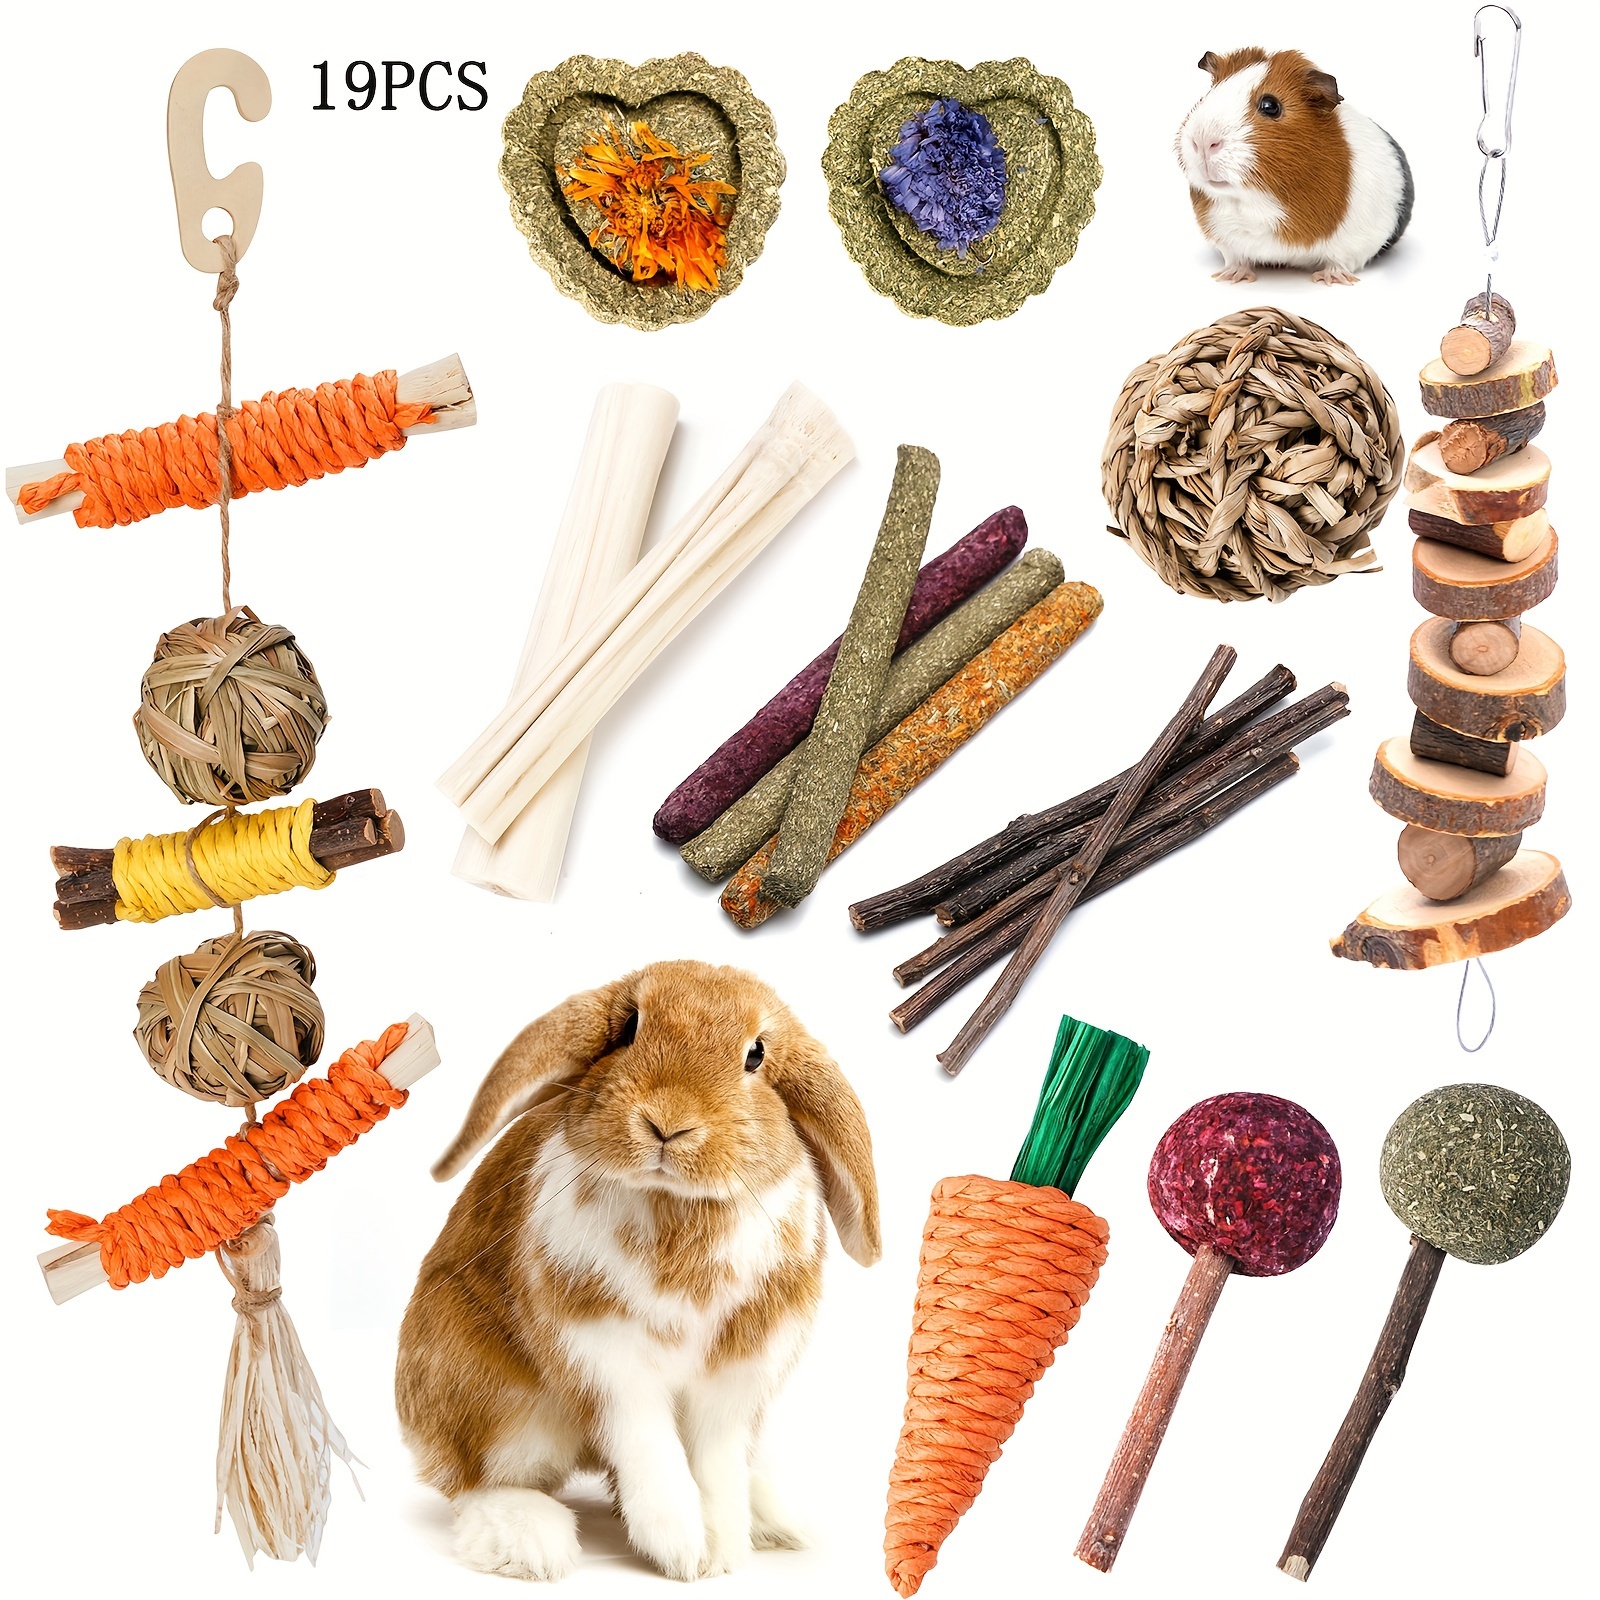 

19pcs Rabbit Chew Toys, Natural Wooden Pet Teething , Assorted Animal Bites Treats For Cage, Bunny & Hamster Accessories, Dental Health, With Hanging Wood Carrot & Corn Shapes